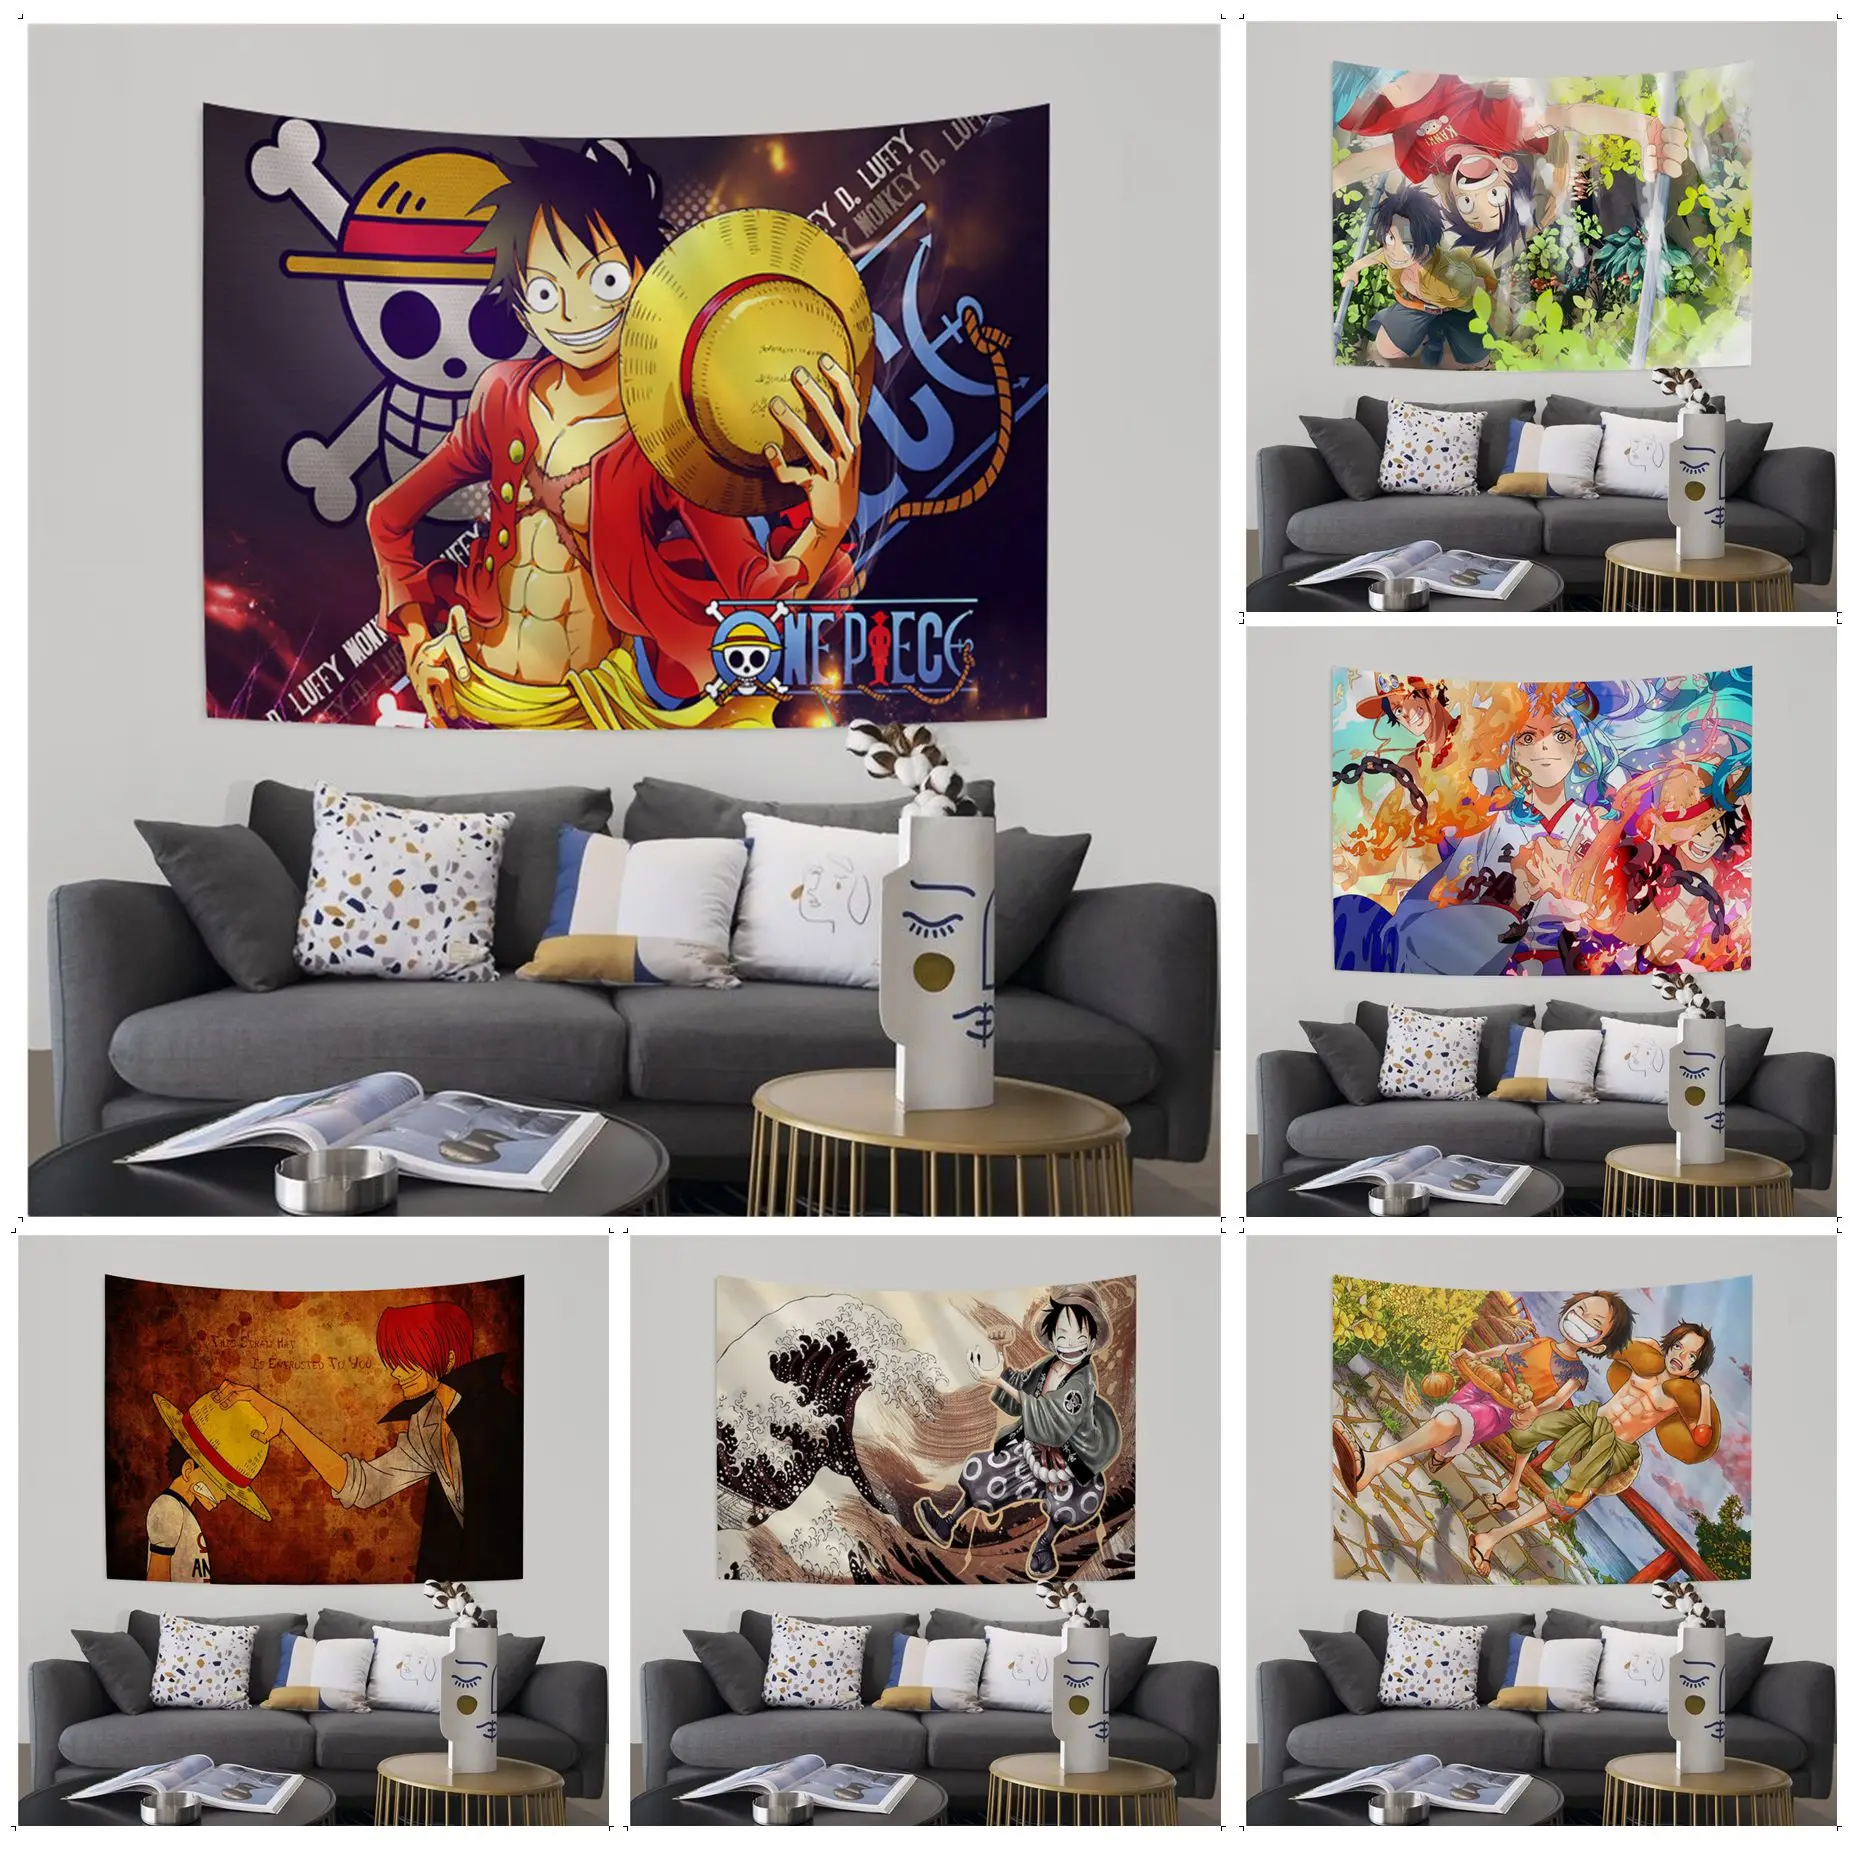 

Bandai One Piece Monkey D. Luffy Anime Tapestry Wall Hanging Decoration Household Wall Art Decor